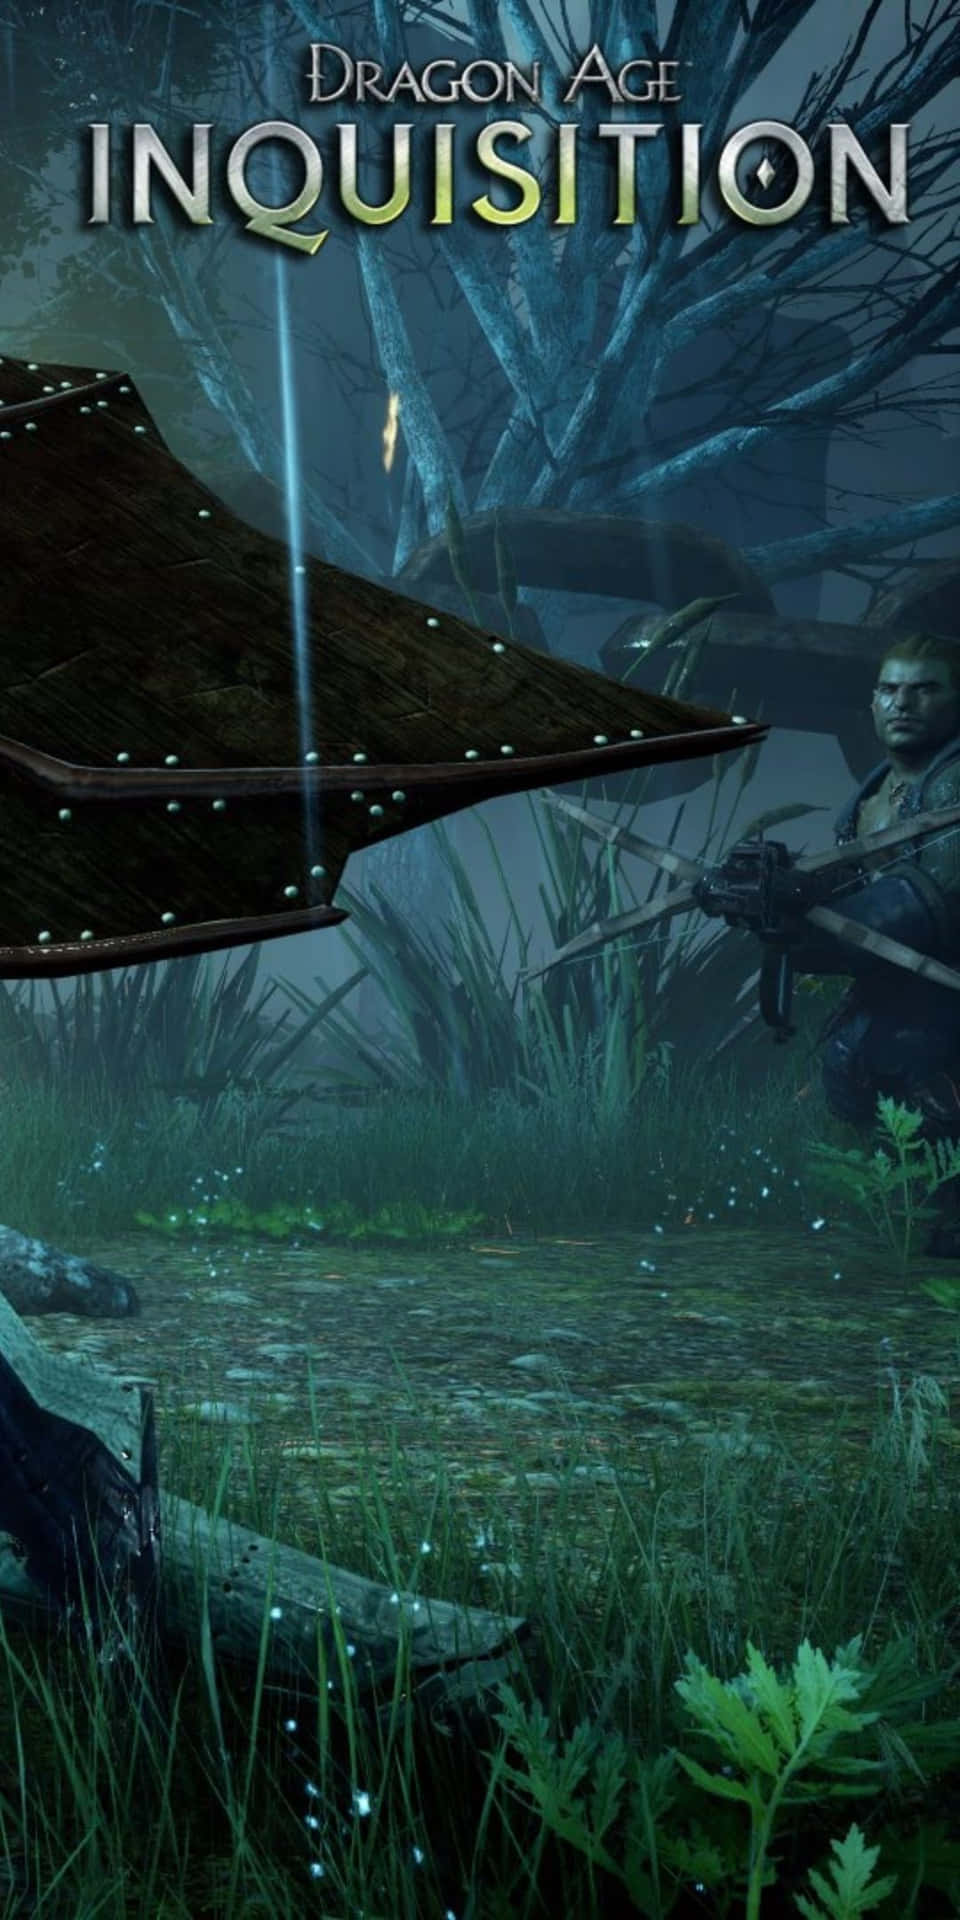 The epic adventure of Pixel 3 continues with Dragon Age Inquisition